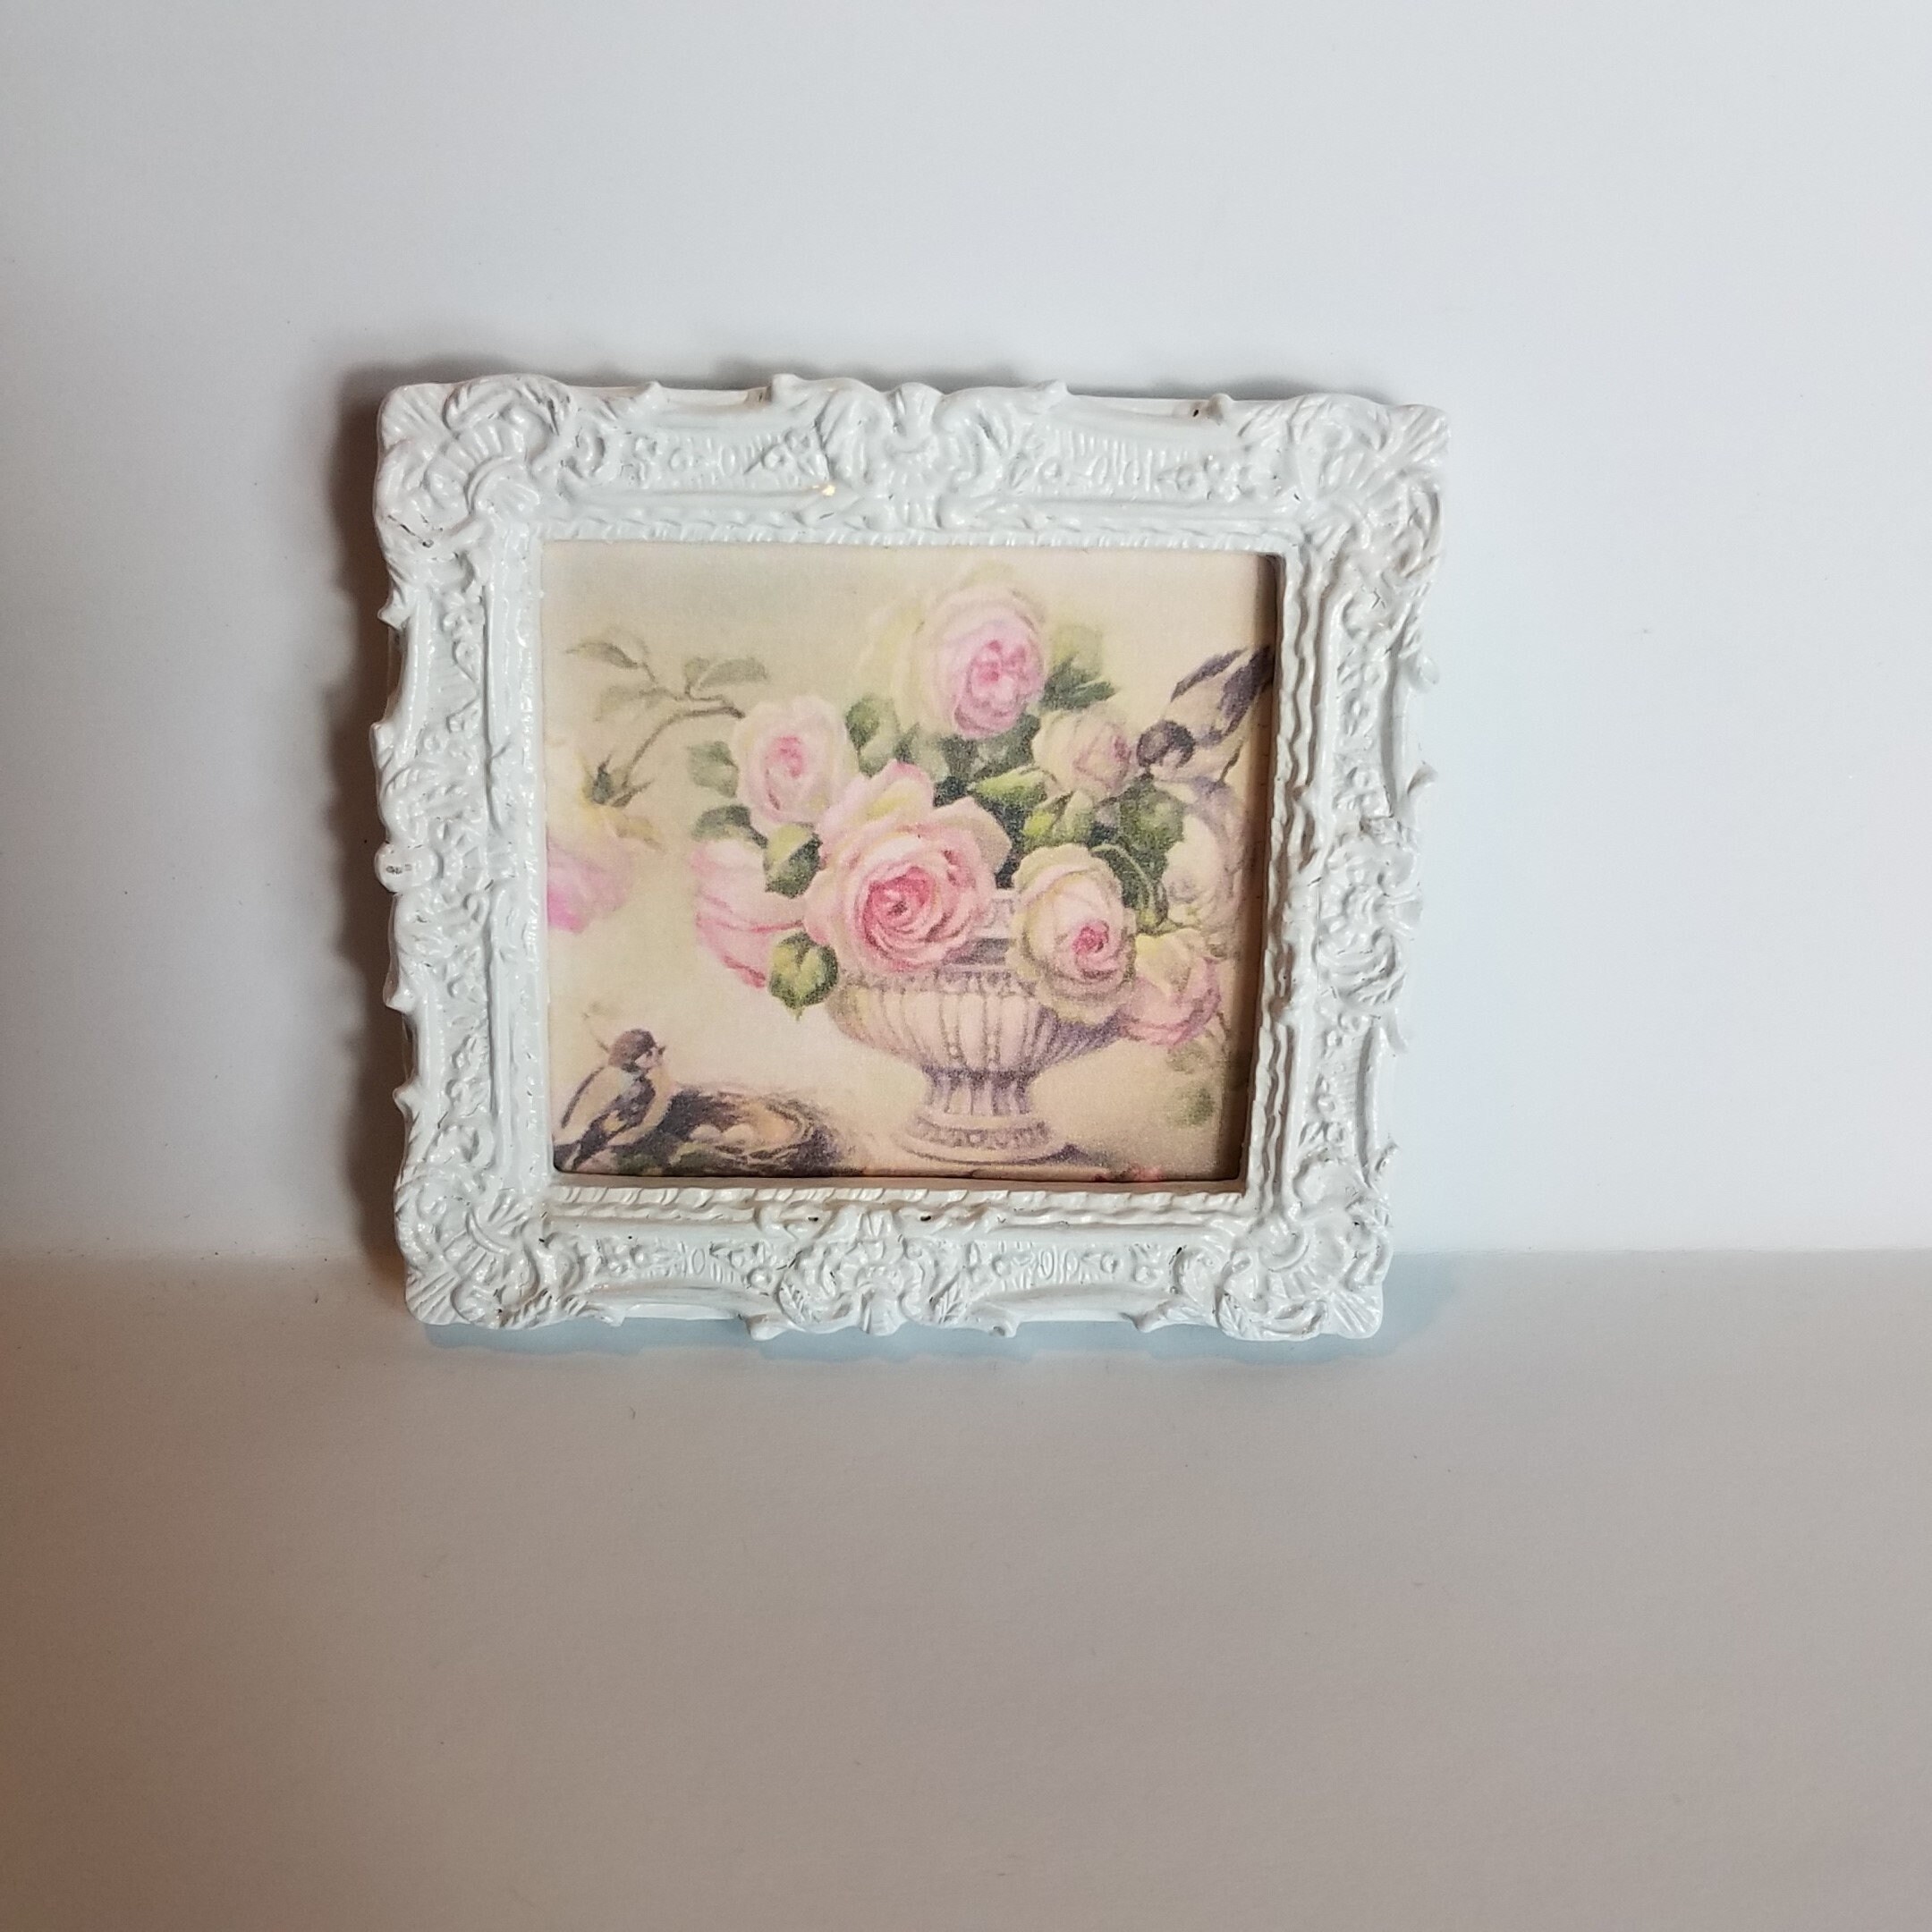 HANDMADE MINIATURE DOLLS HOUSE ACCESSORY CANVAS STYLE WALL ART PICTURE PINK ROSE 